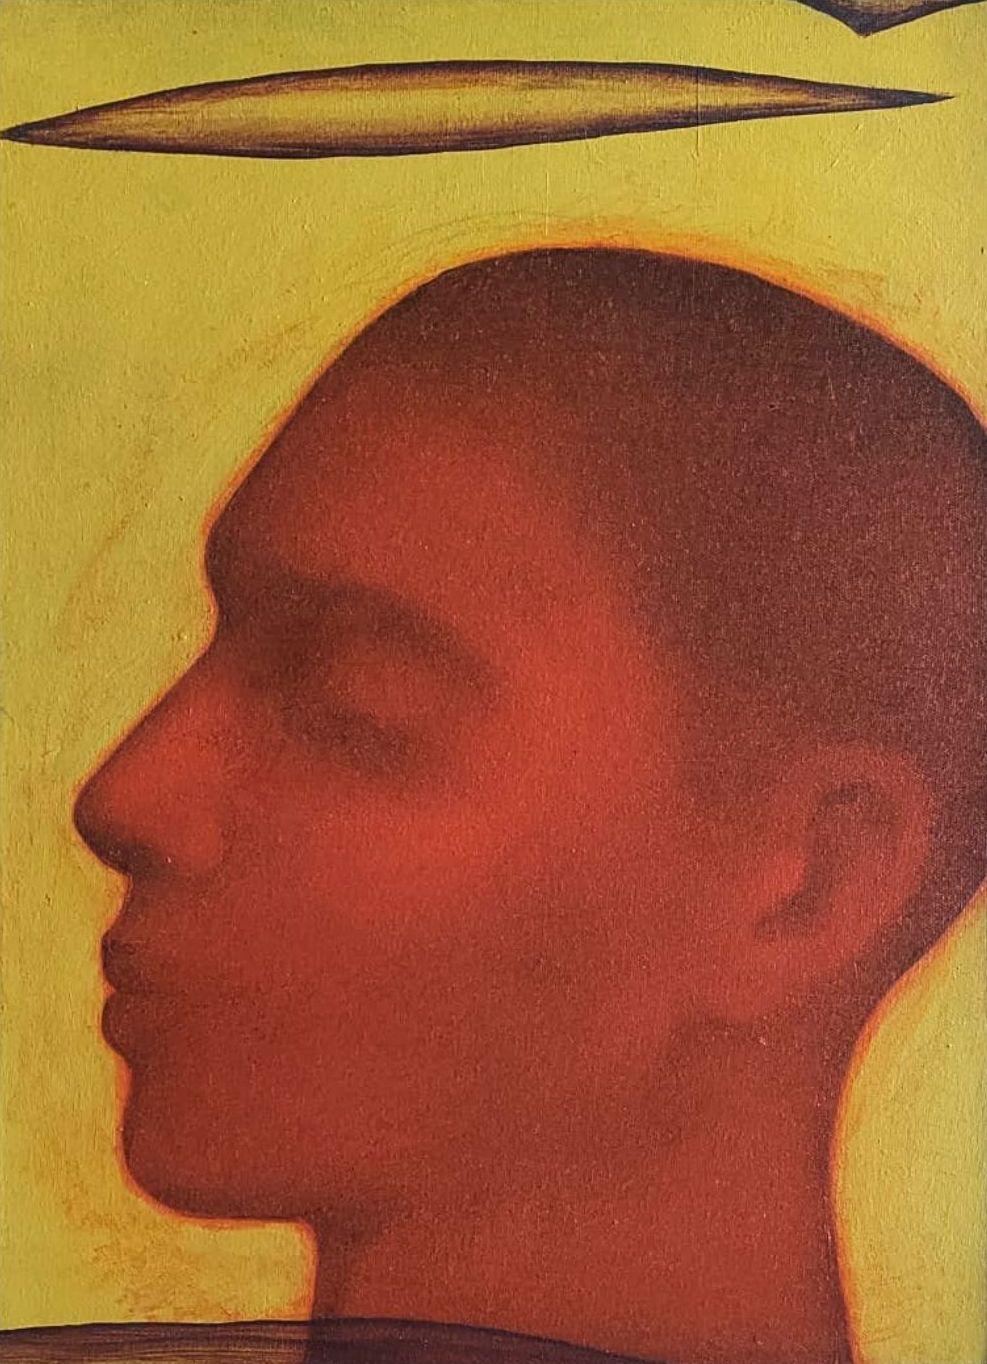 Chandra Bhattacharya Figurative Painting - Head, Acrylic on Canvas, Red, Yellow Colors by Contemporary Artist “In Stock”